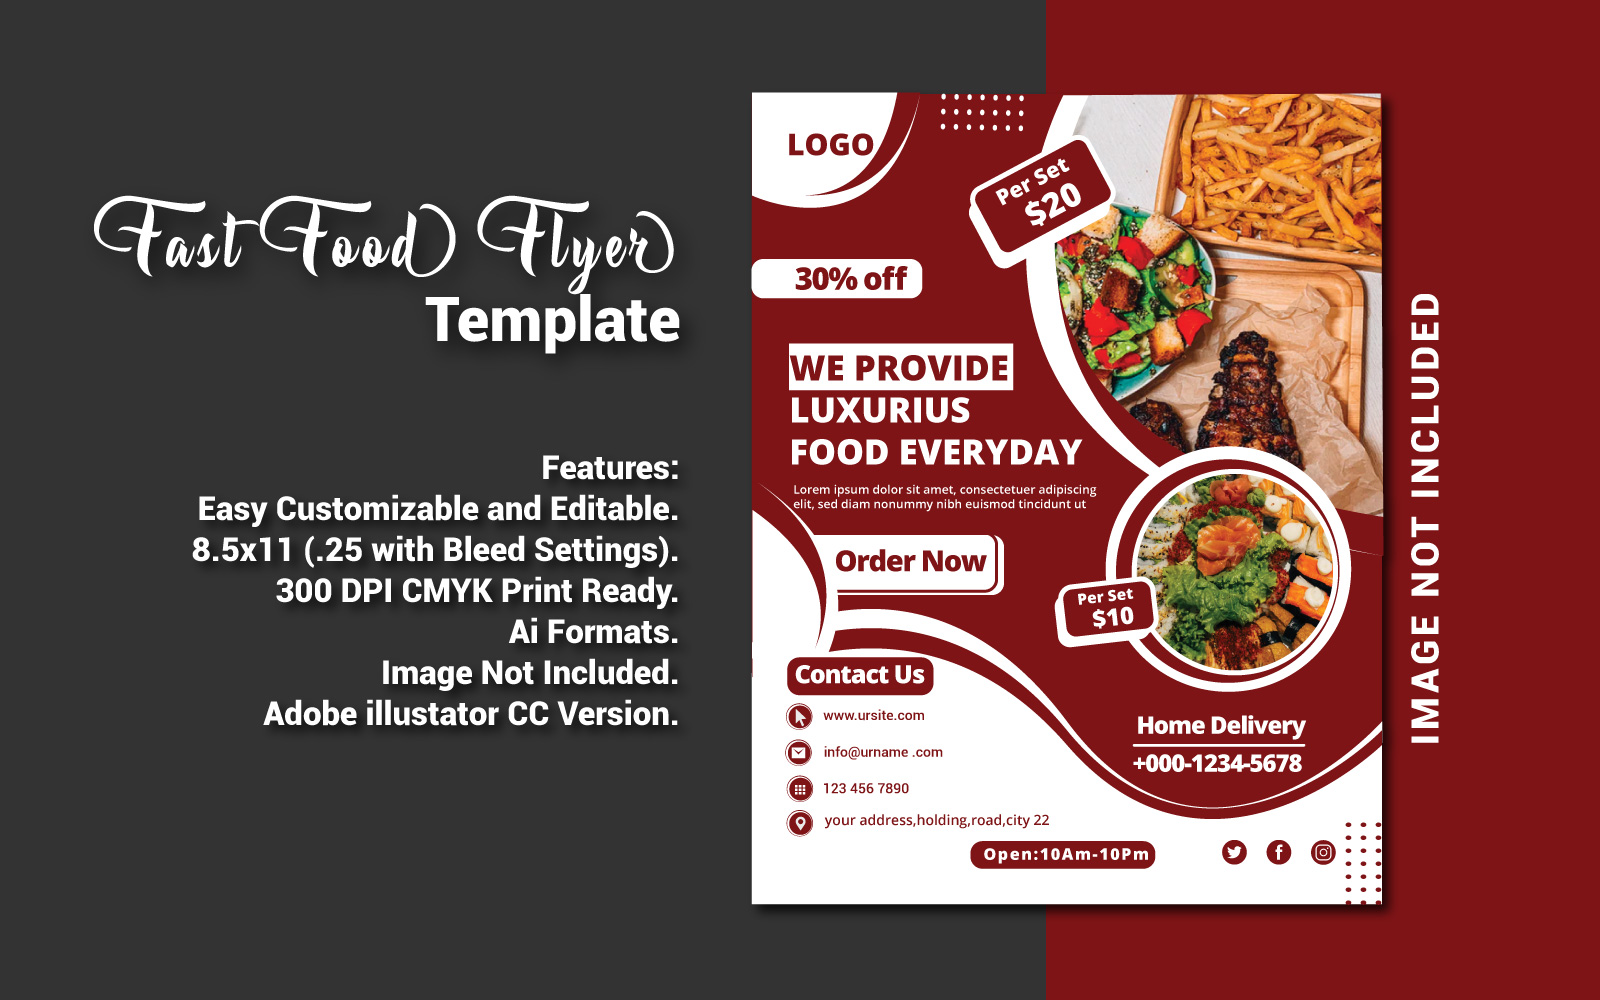 Fast food Flyer - Corporate Identity Template